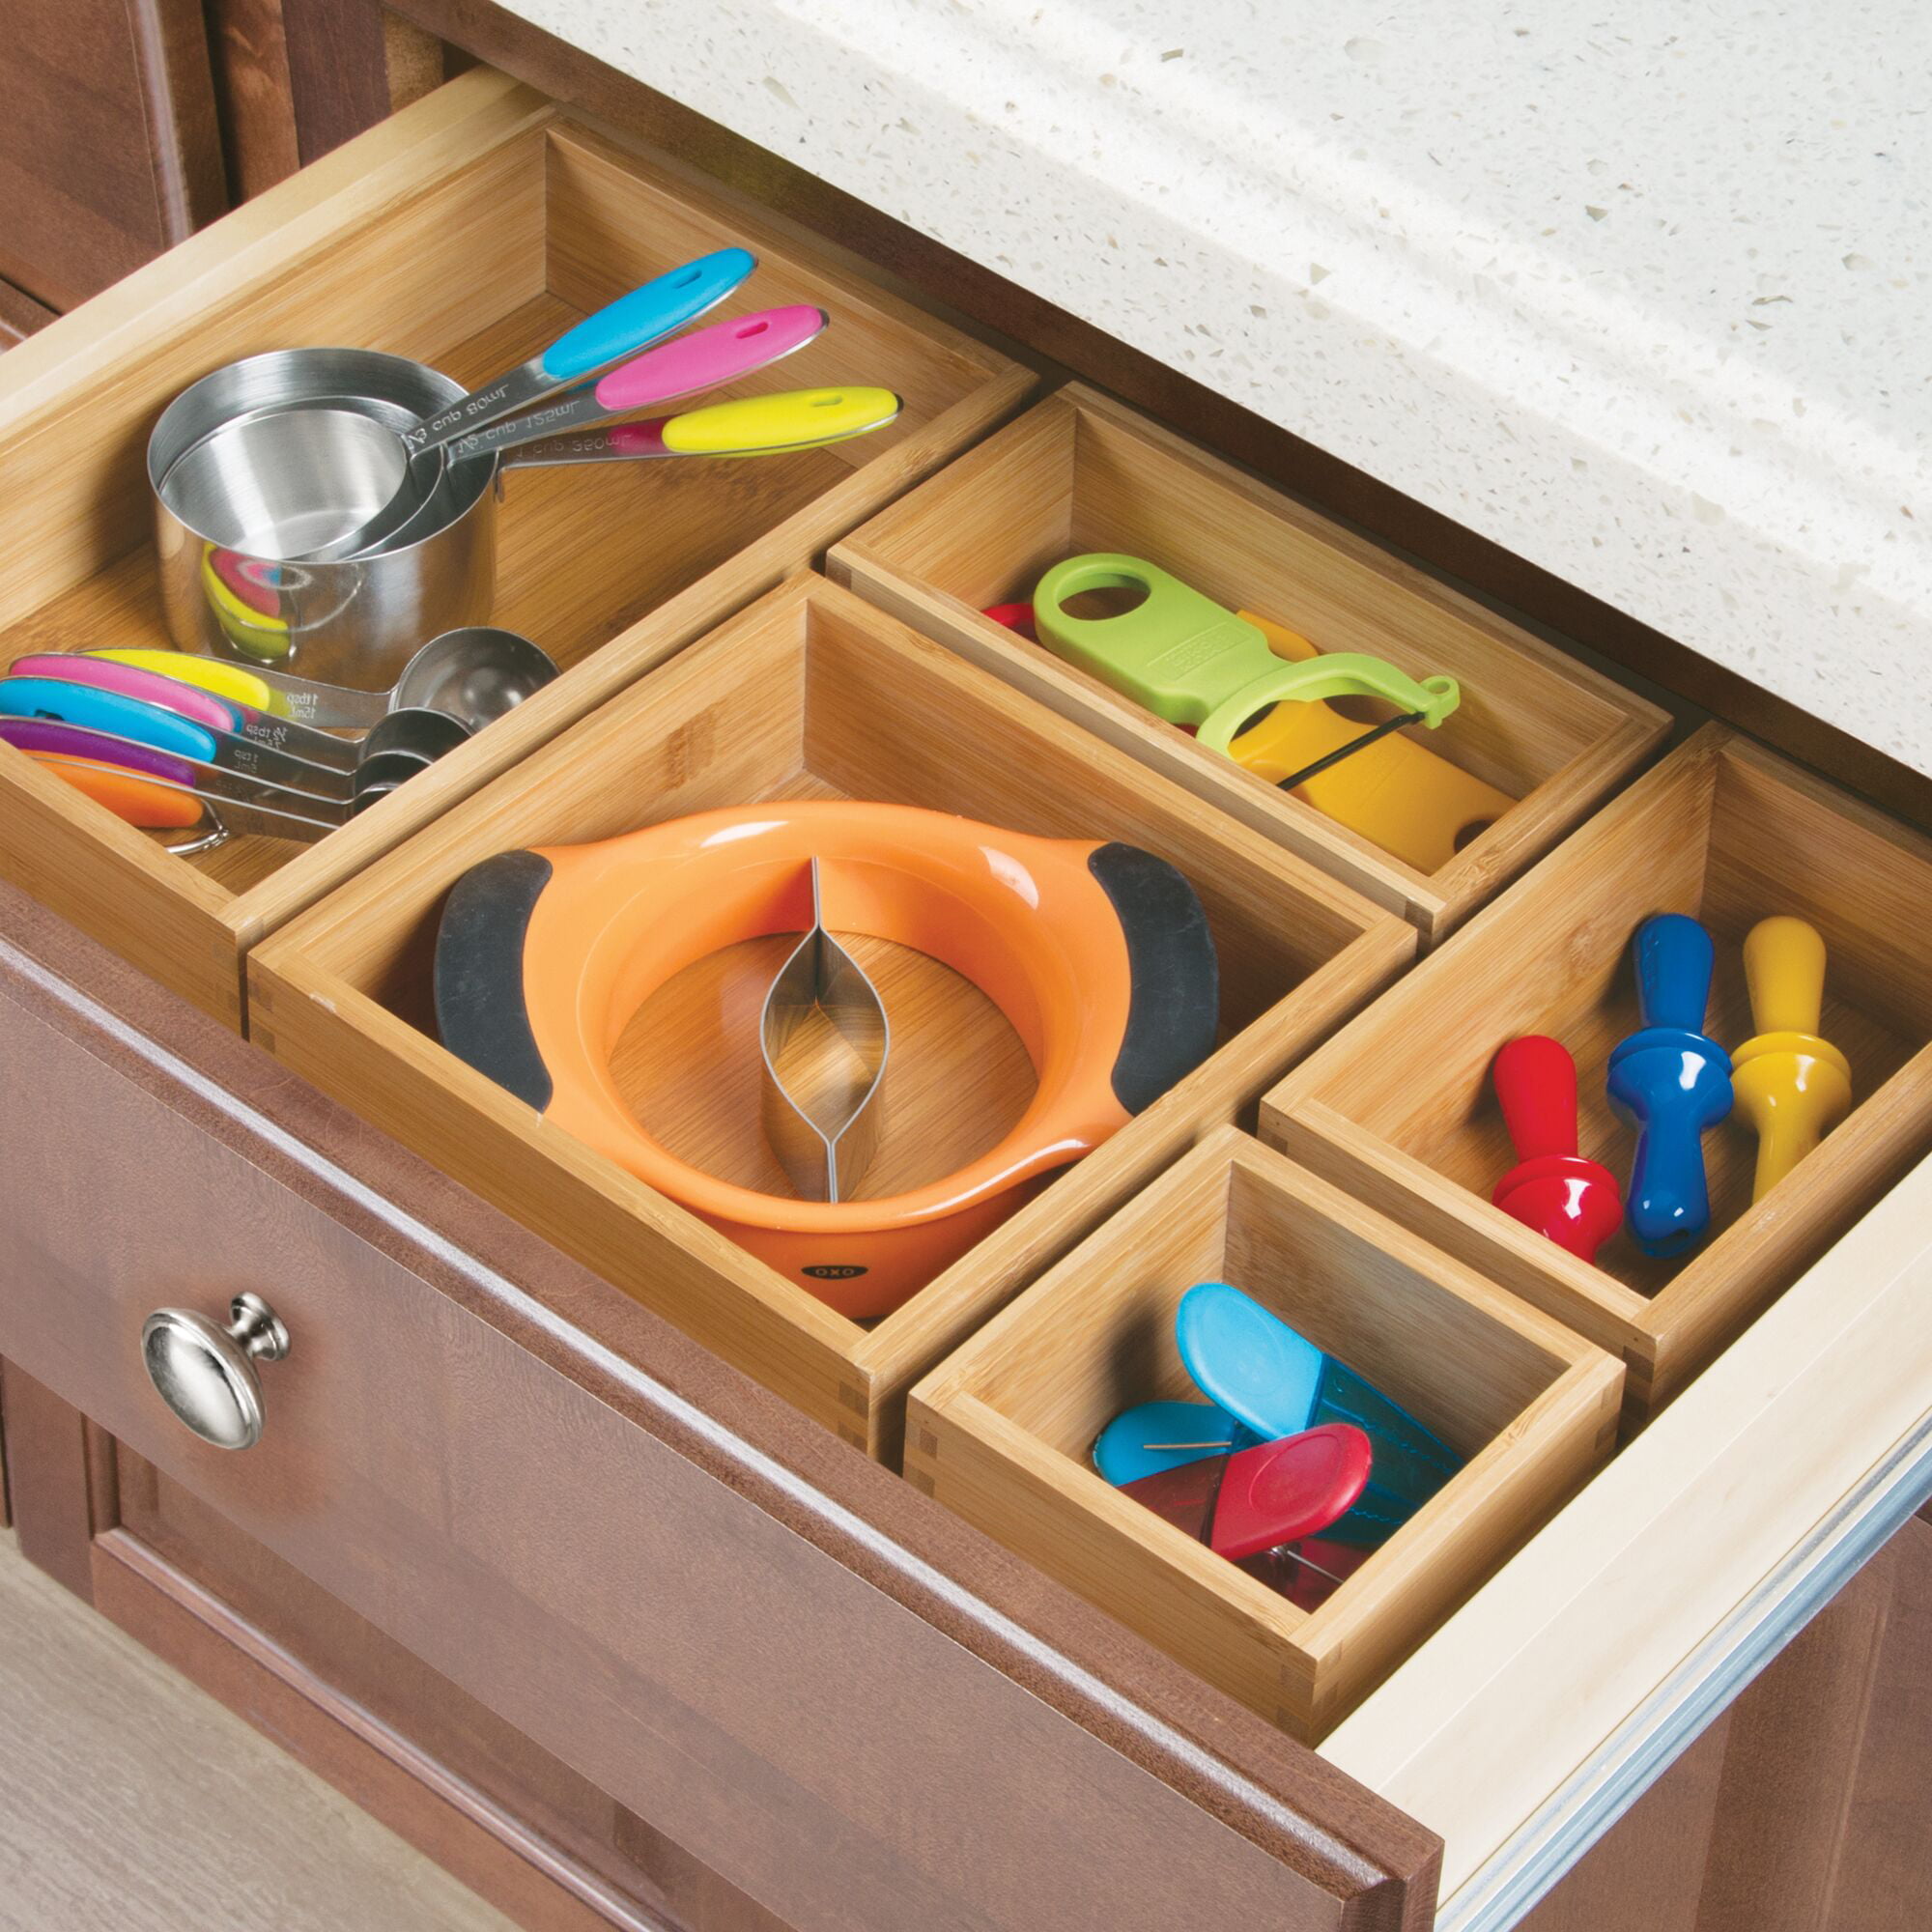 Bamboo Spice Drawer Organizer (Expands 10.5 to 18.5 in)